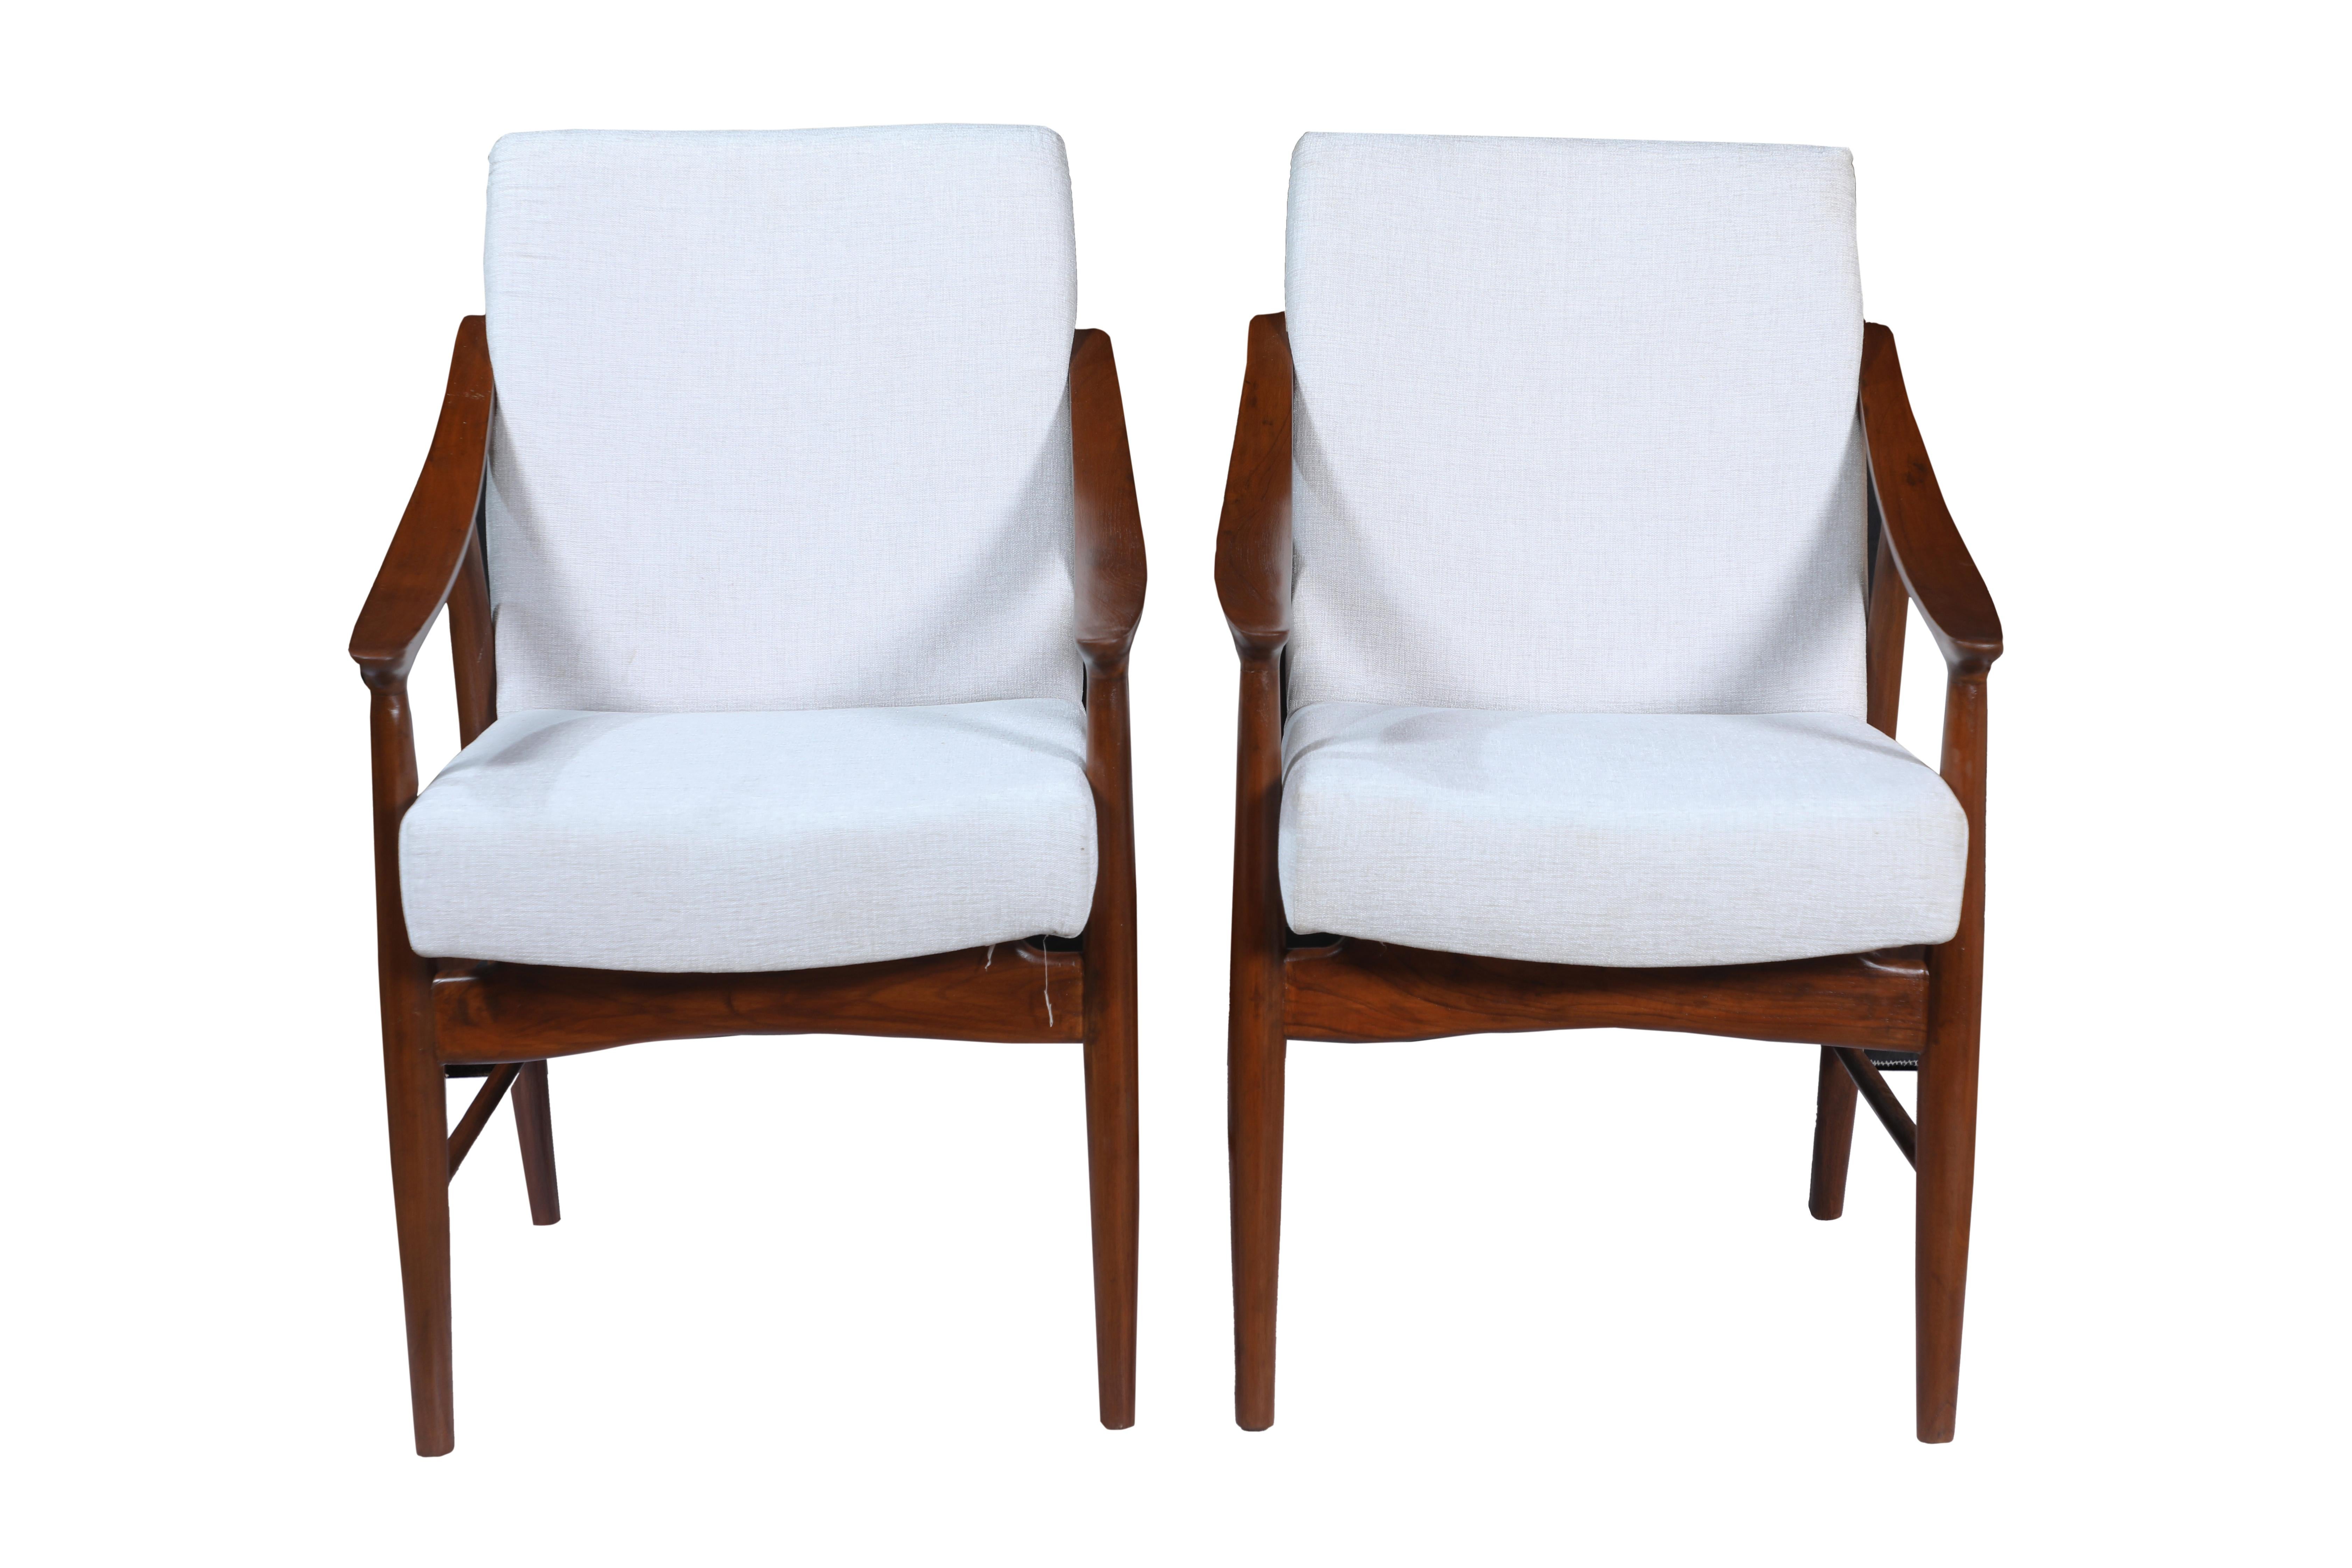 A handsome pair of Danish teak Mid-Century Modern side armchairs. Great to use in an office or in a living room or sitting room. A lovely sweep the the arms make them quite comfortable. They have been refinished and reupholstered in a linen/silk